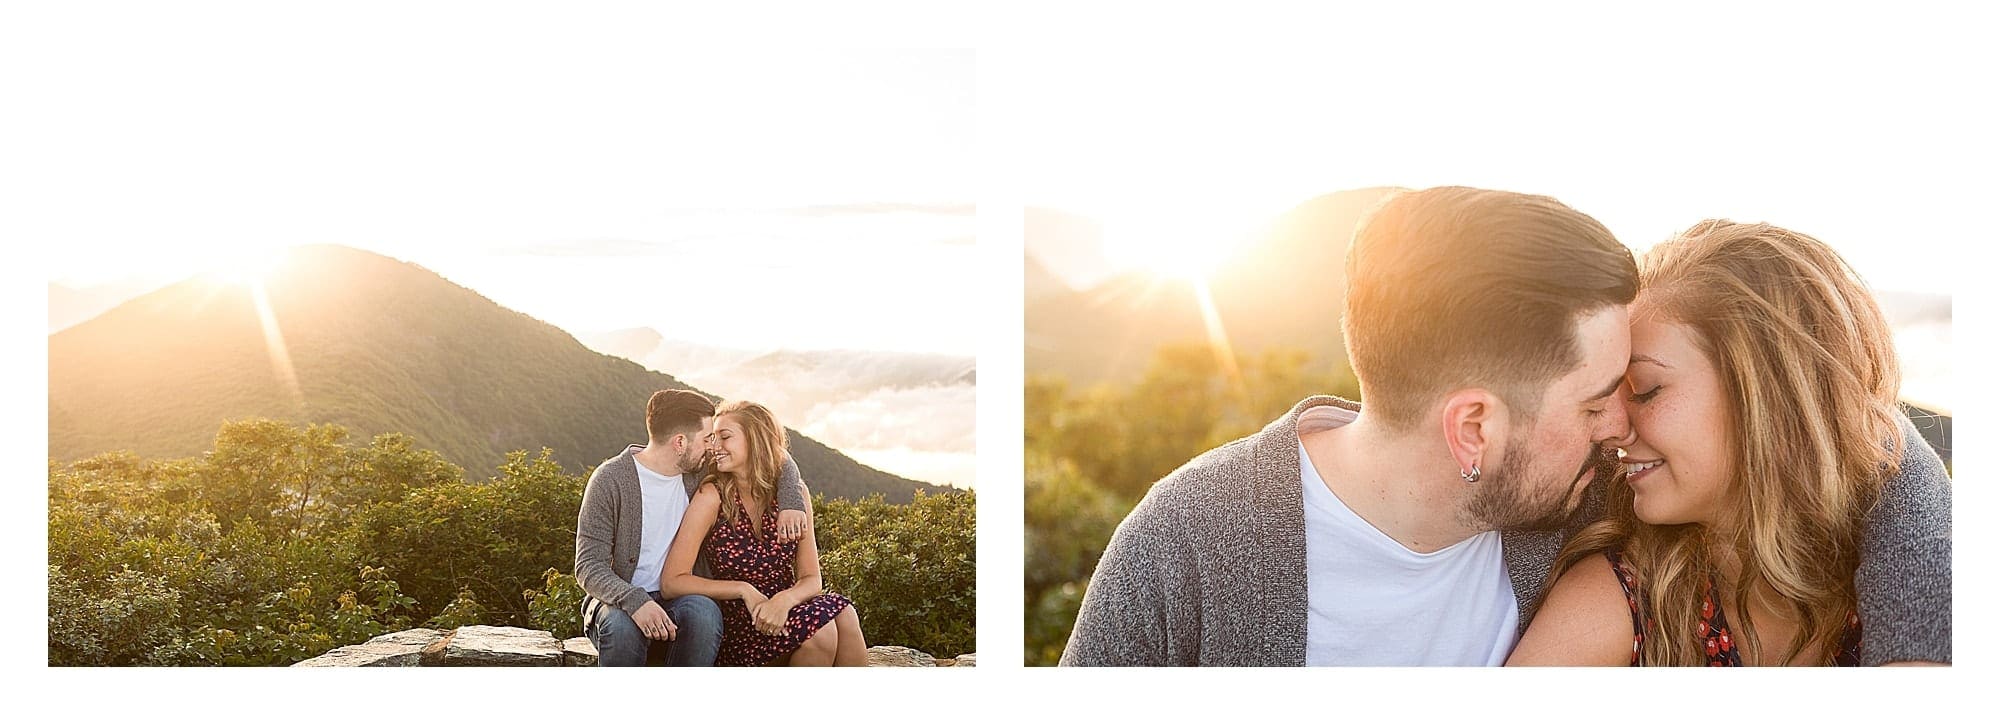 Engaged couple kissing while sitting on brick wall with sunrise and mountains in background